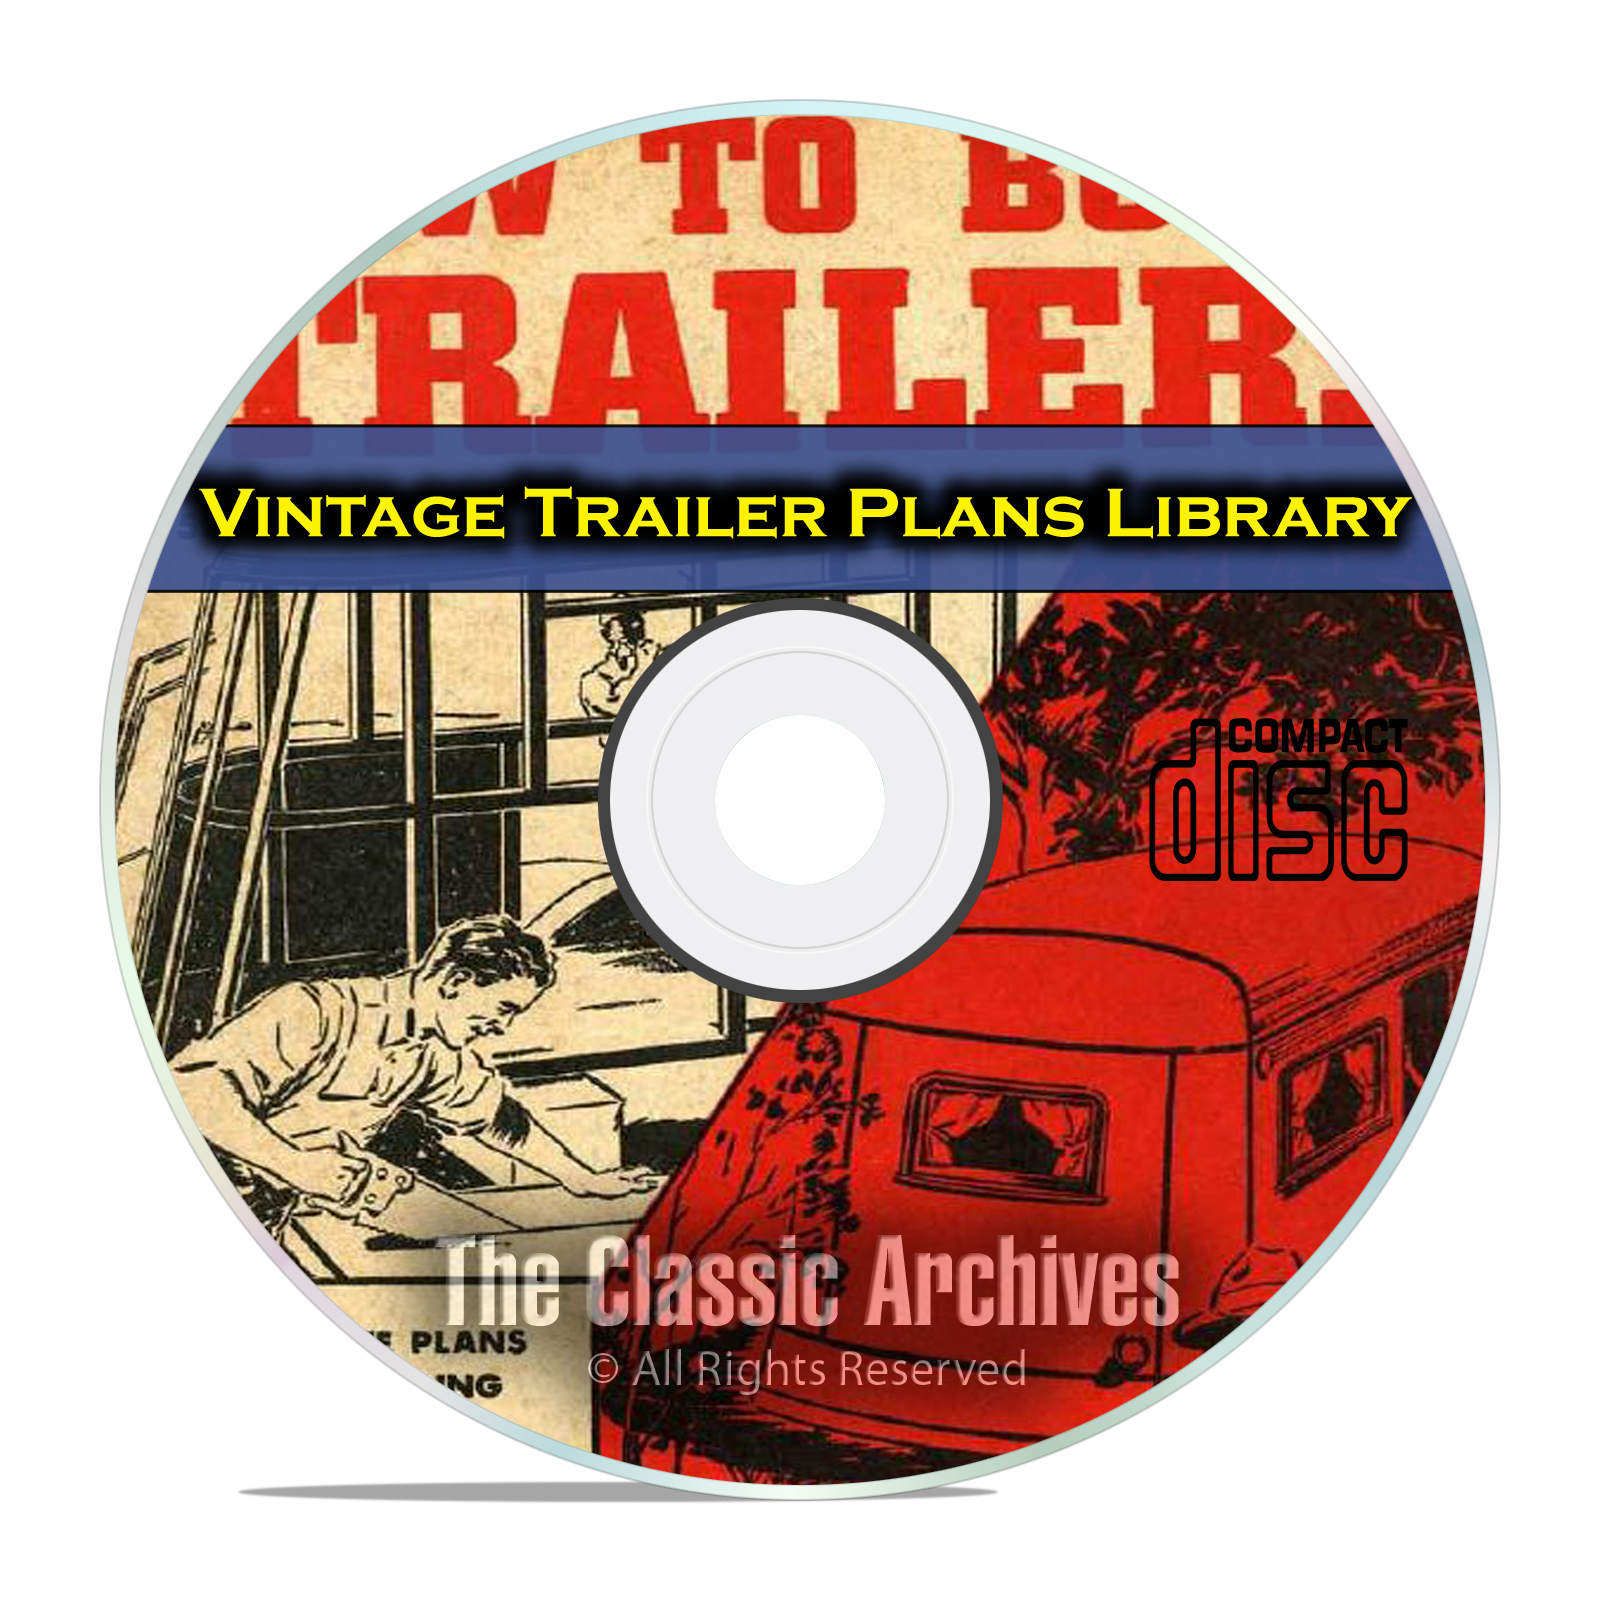 Learn How to Build an Antique Trailer, Camper Plans, Vintage Catalogs CD